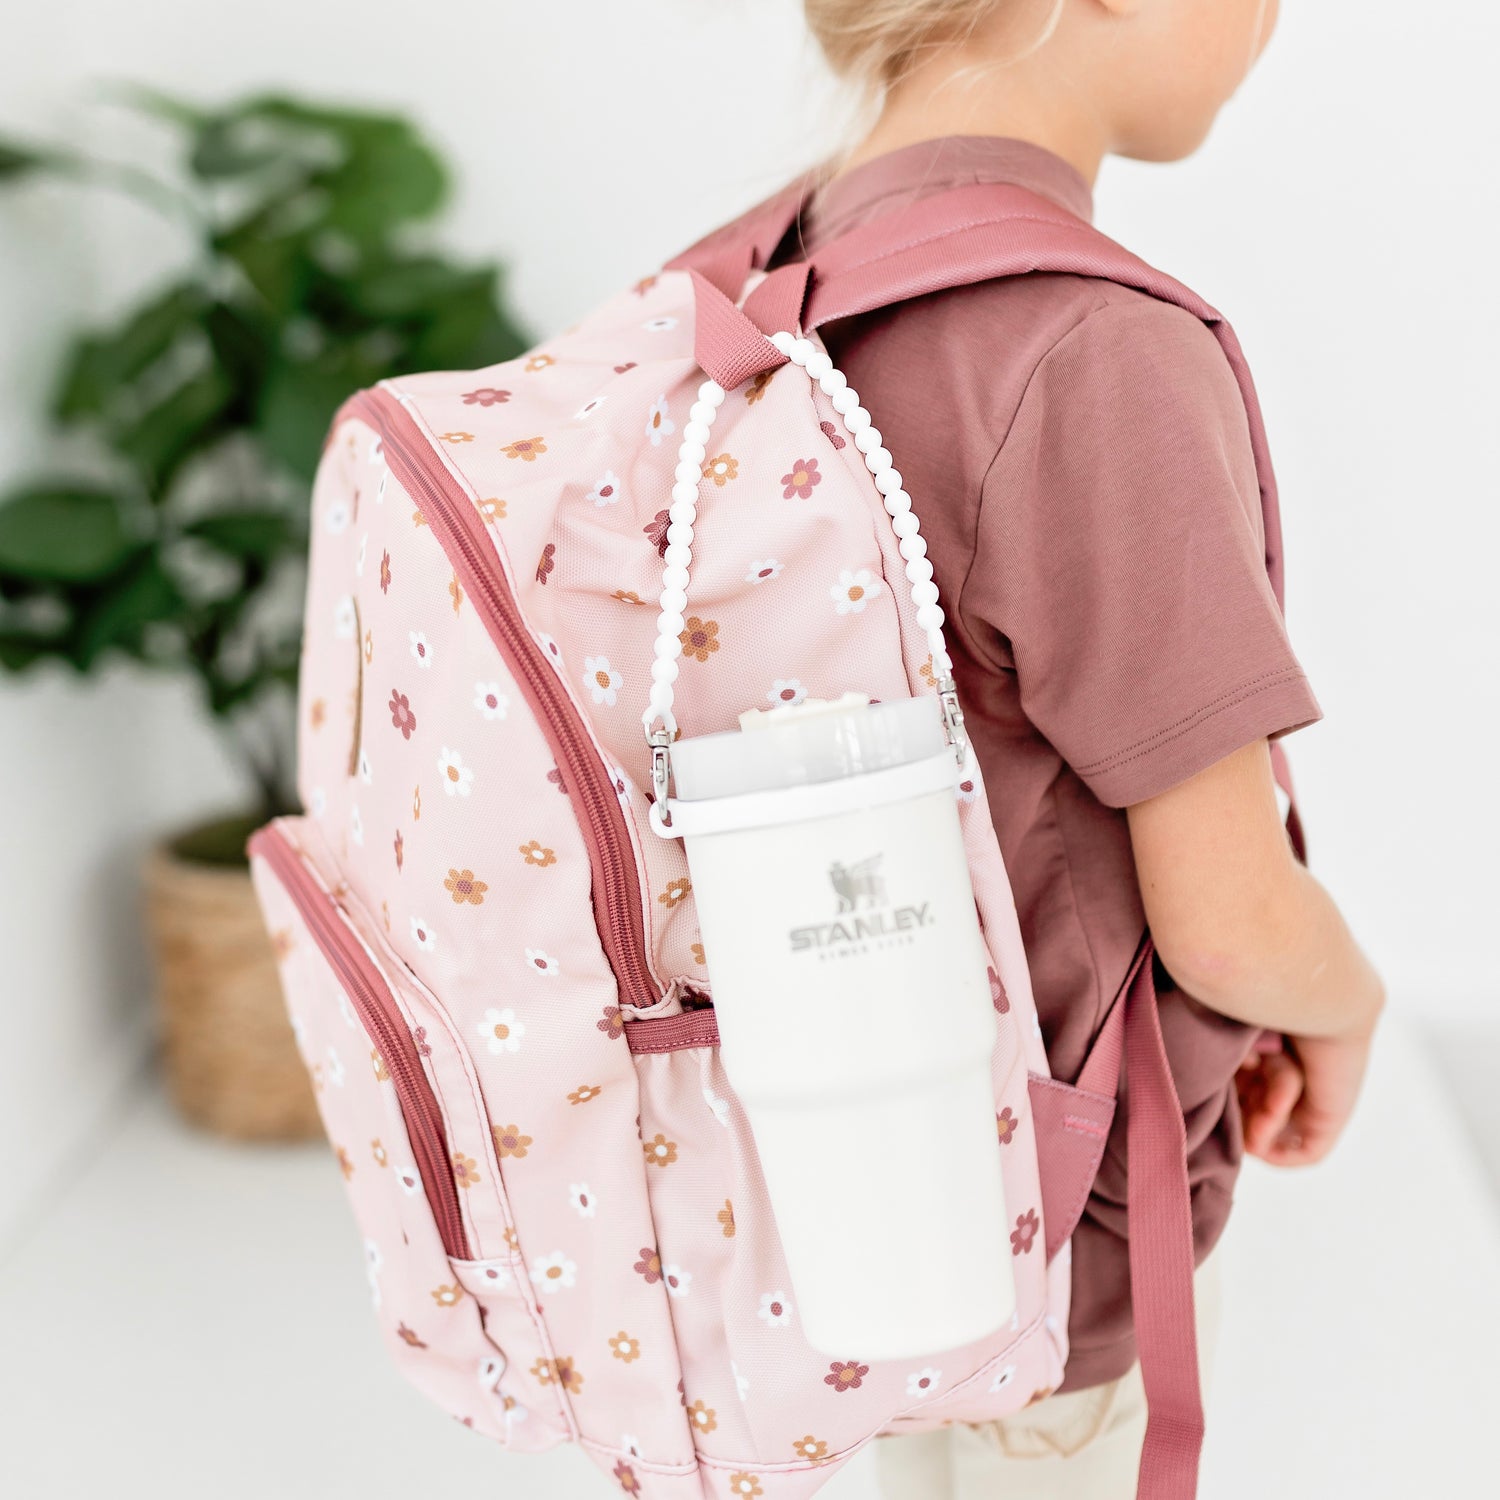 Girl wearing a backpack with a White Cutie Handle attached holding a waterbottle.